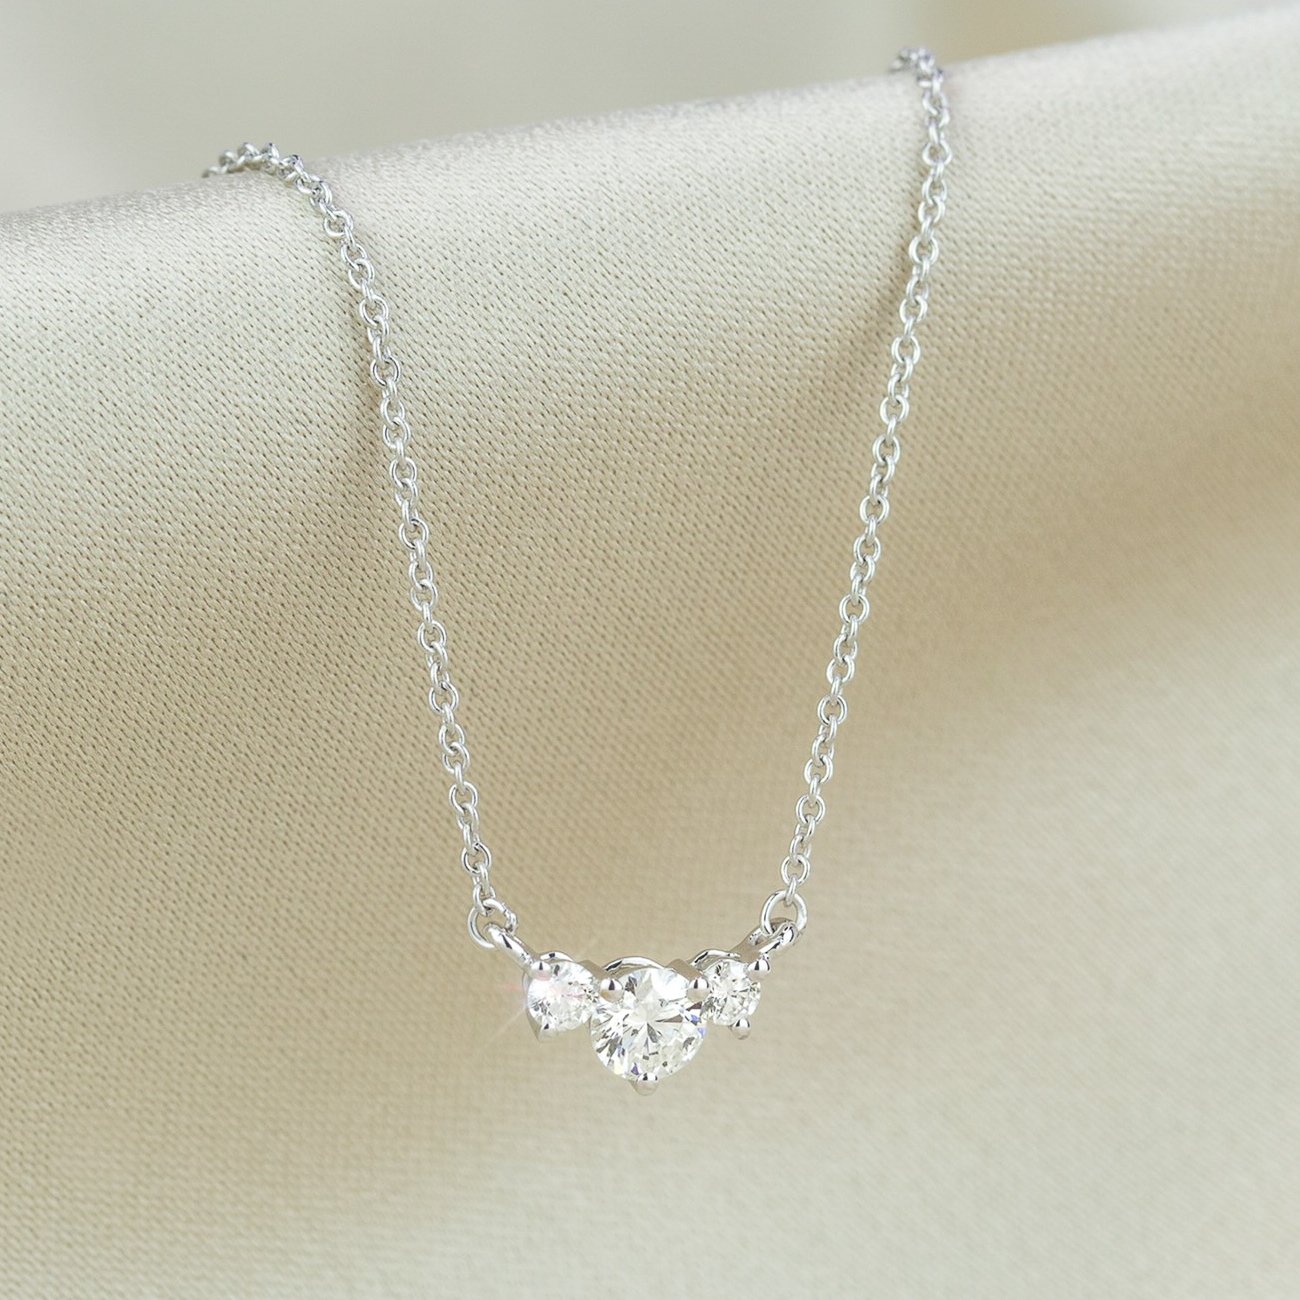 Top more than 156 3 stone horizontal diamond necklace best